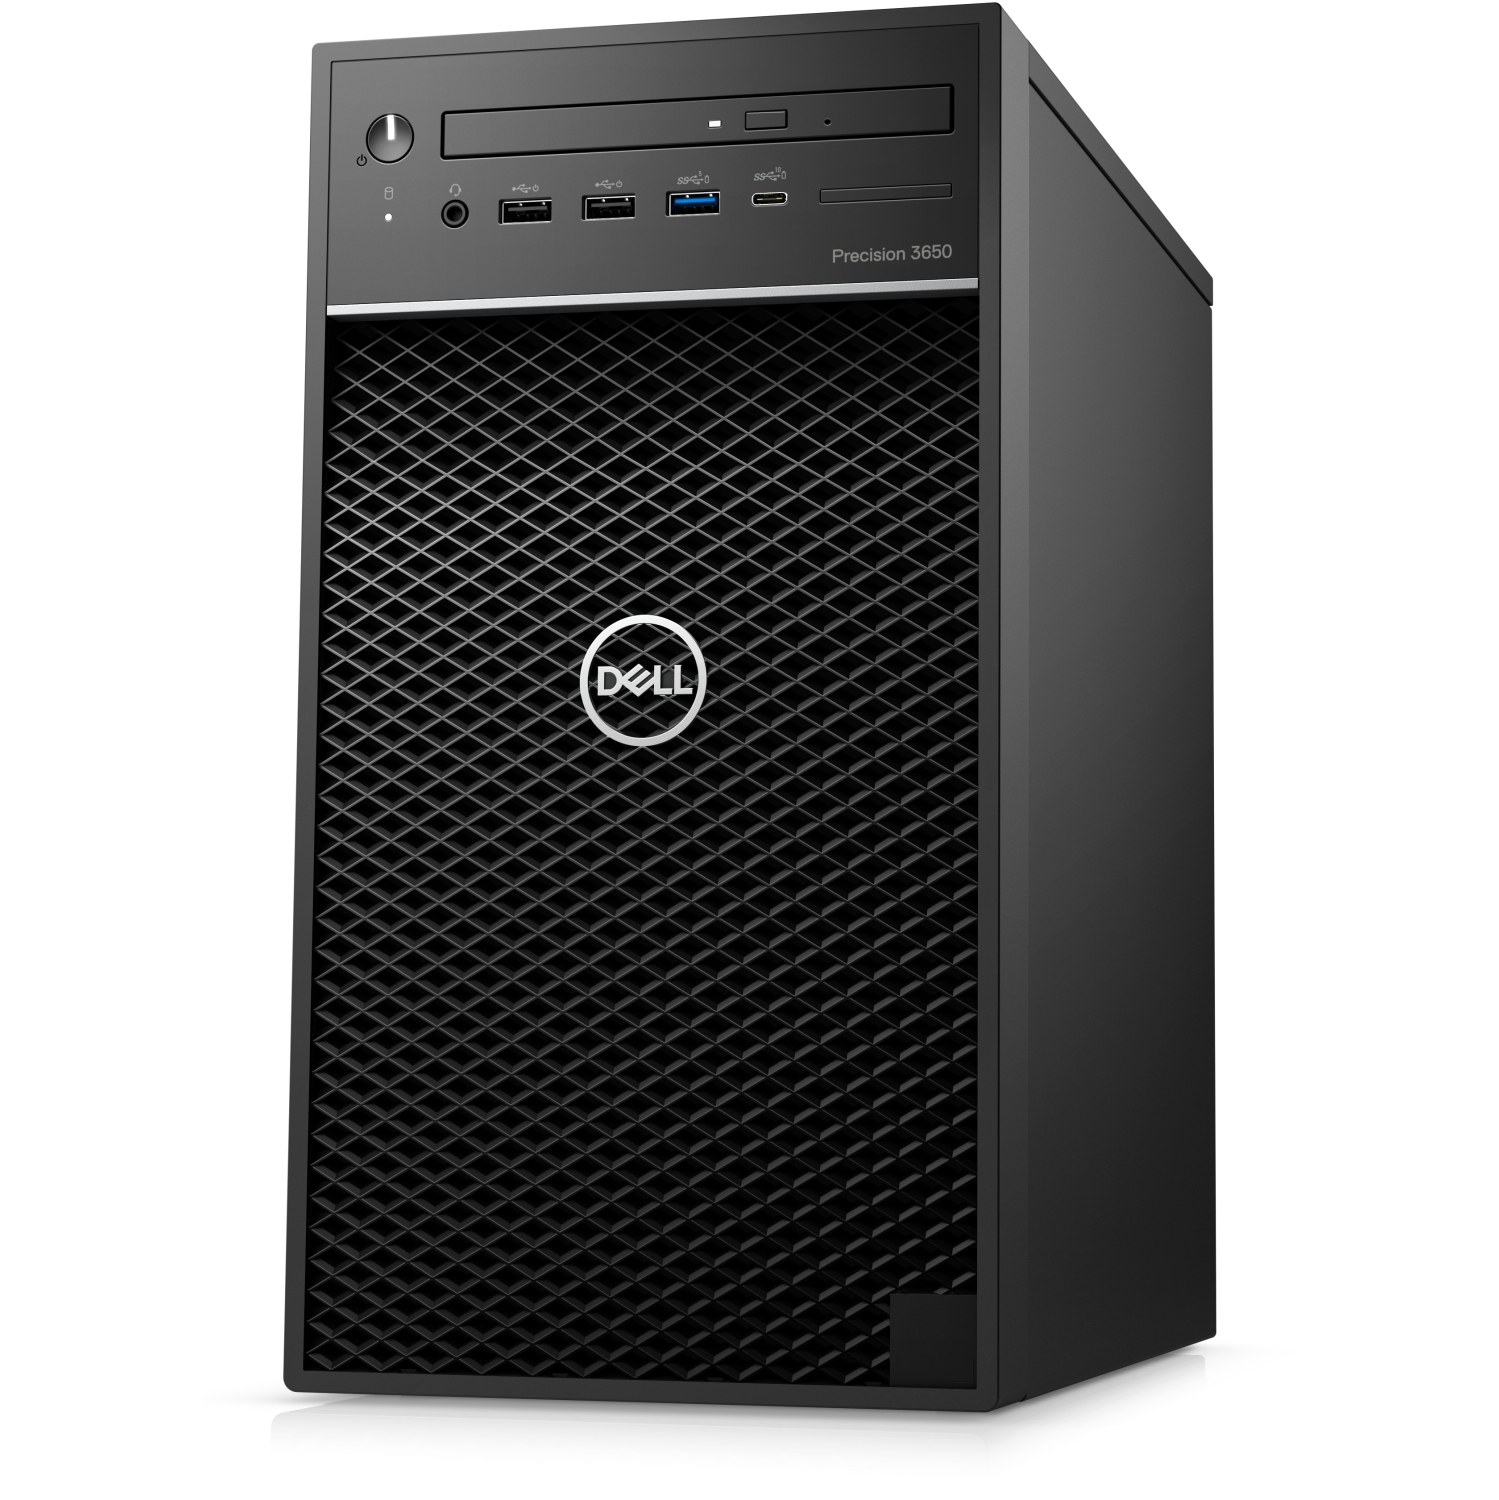 Refurbished (Excellent) - Dell Precision T3650 Workstation Desktop (2021), Core i9, 1TB SSD + 1TB HDD, 32GB RAM, RTX 5000, 8 Cores @ 4.9 GHz, 11th Gen CPU Certified